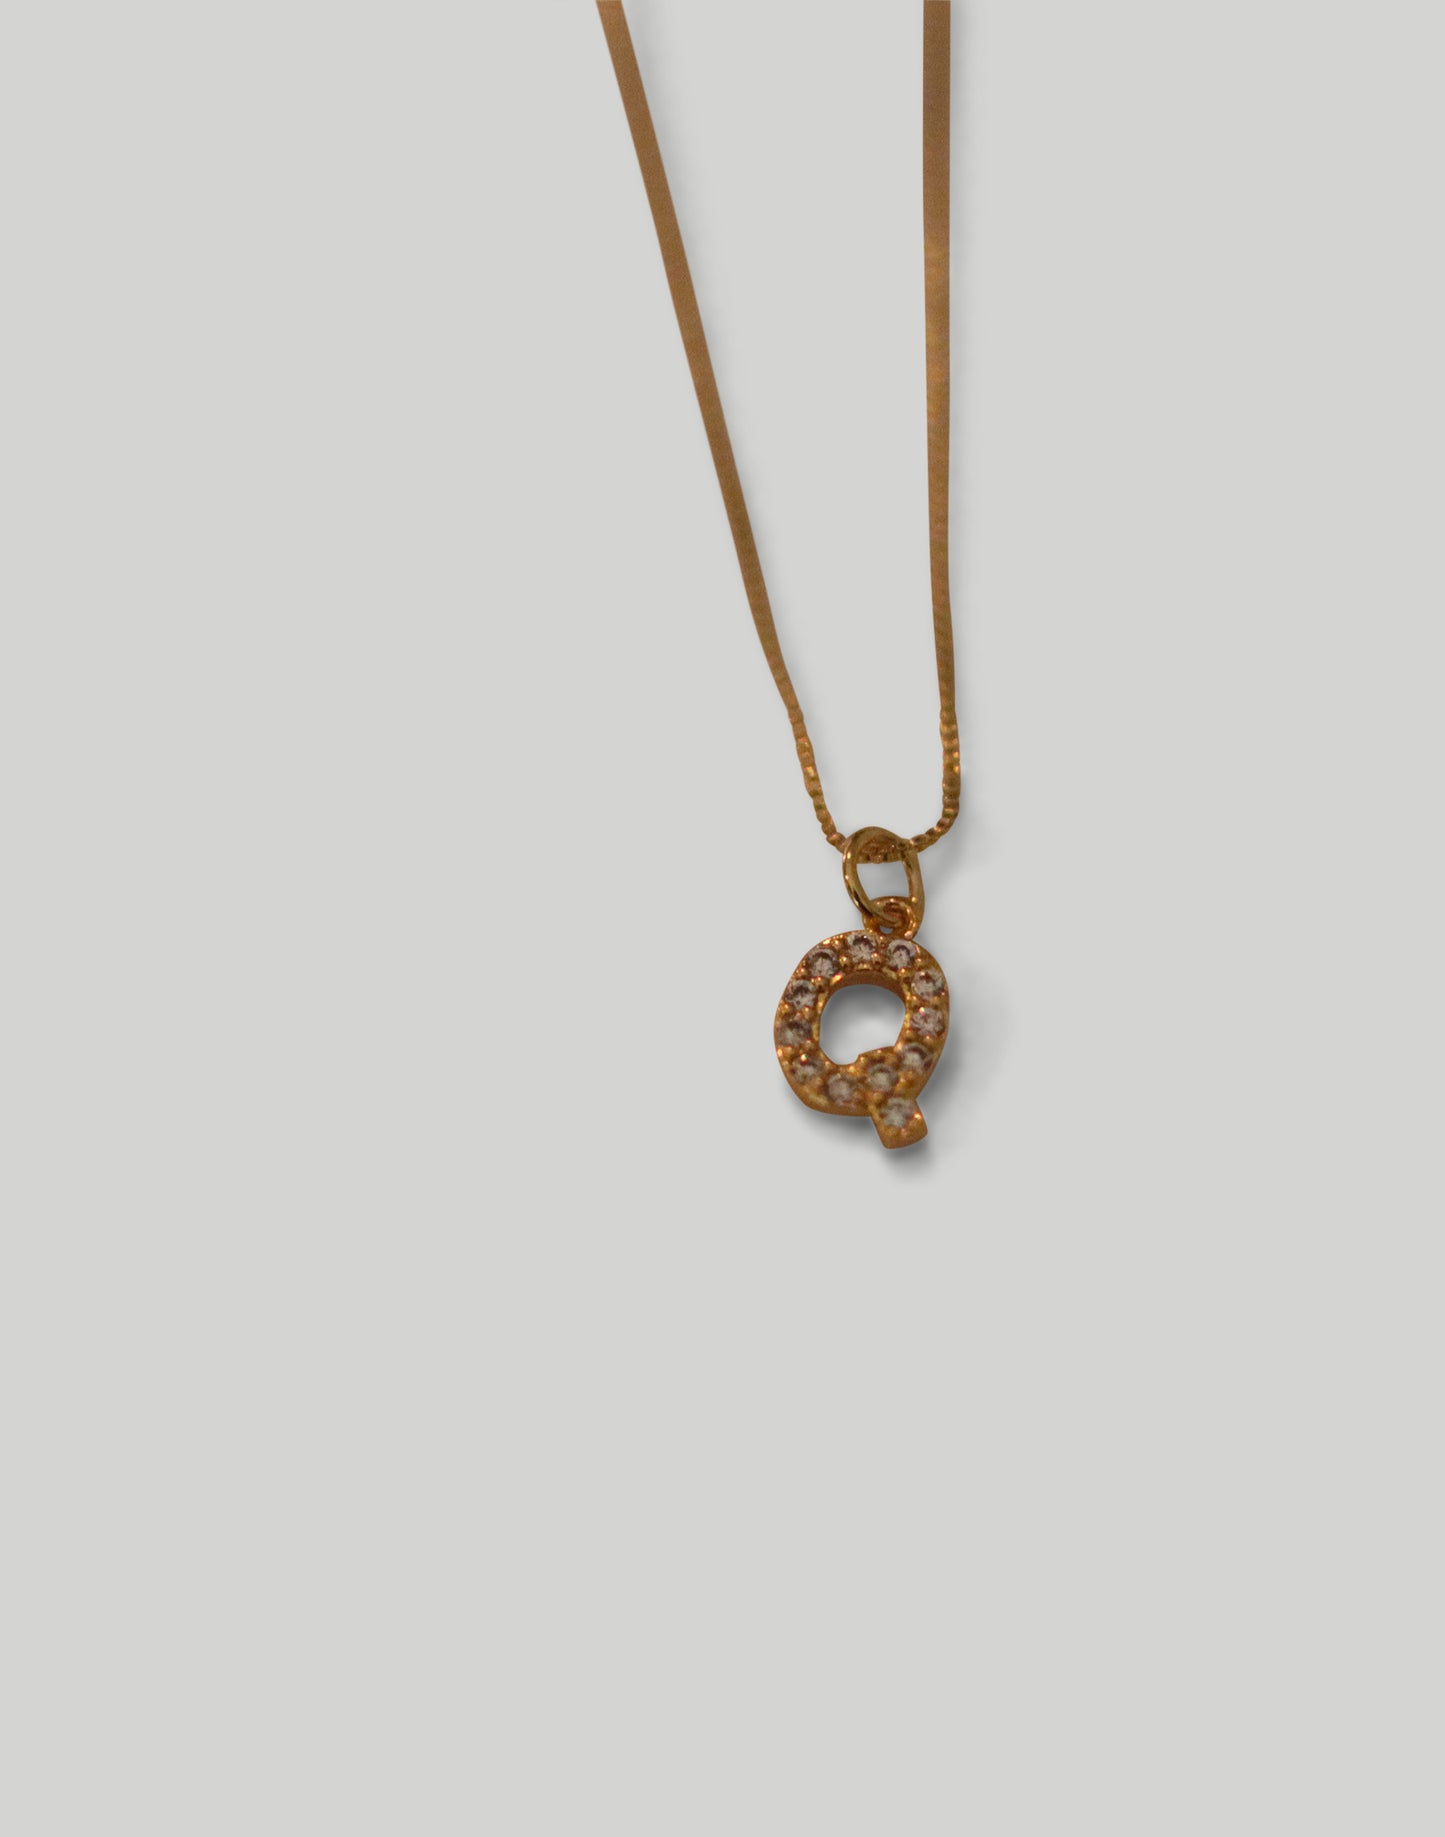 The Initial CZ Necklace